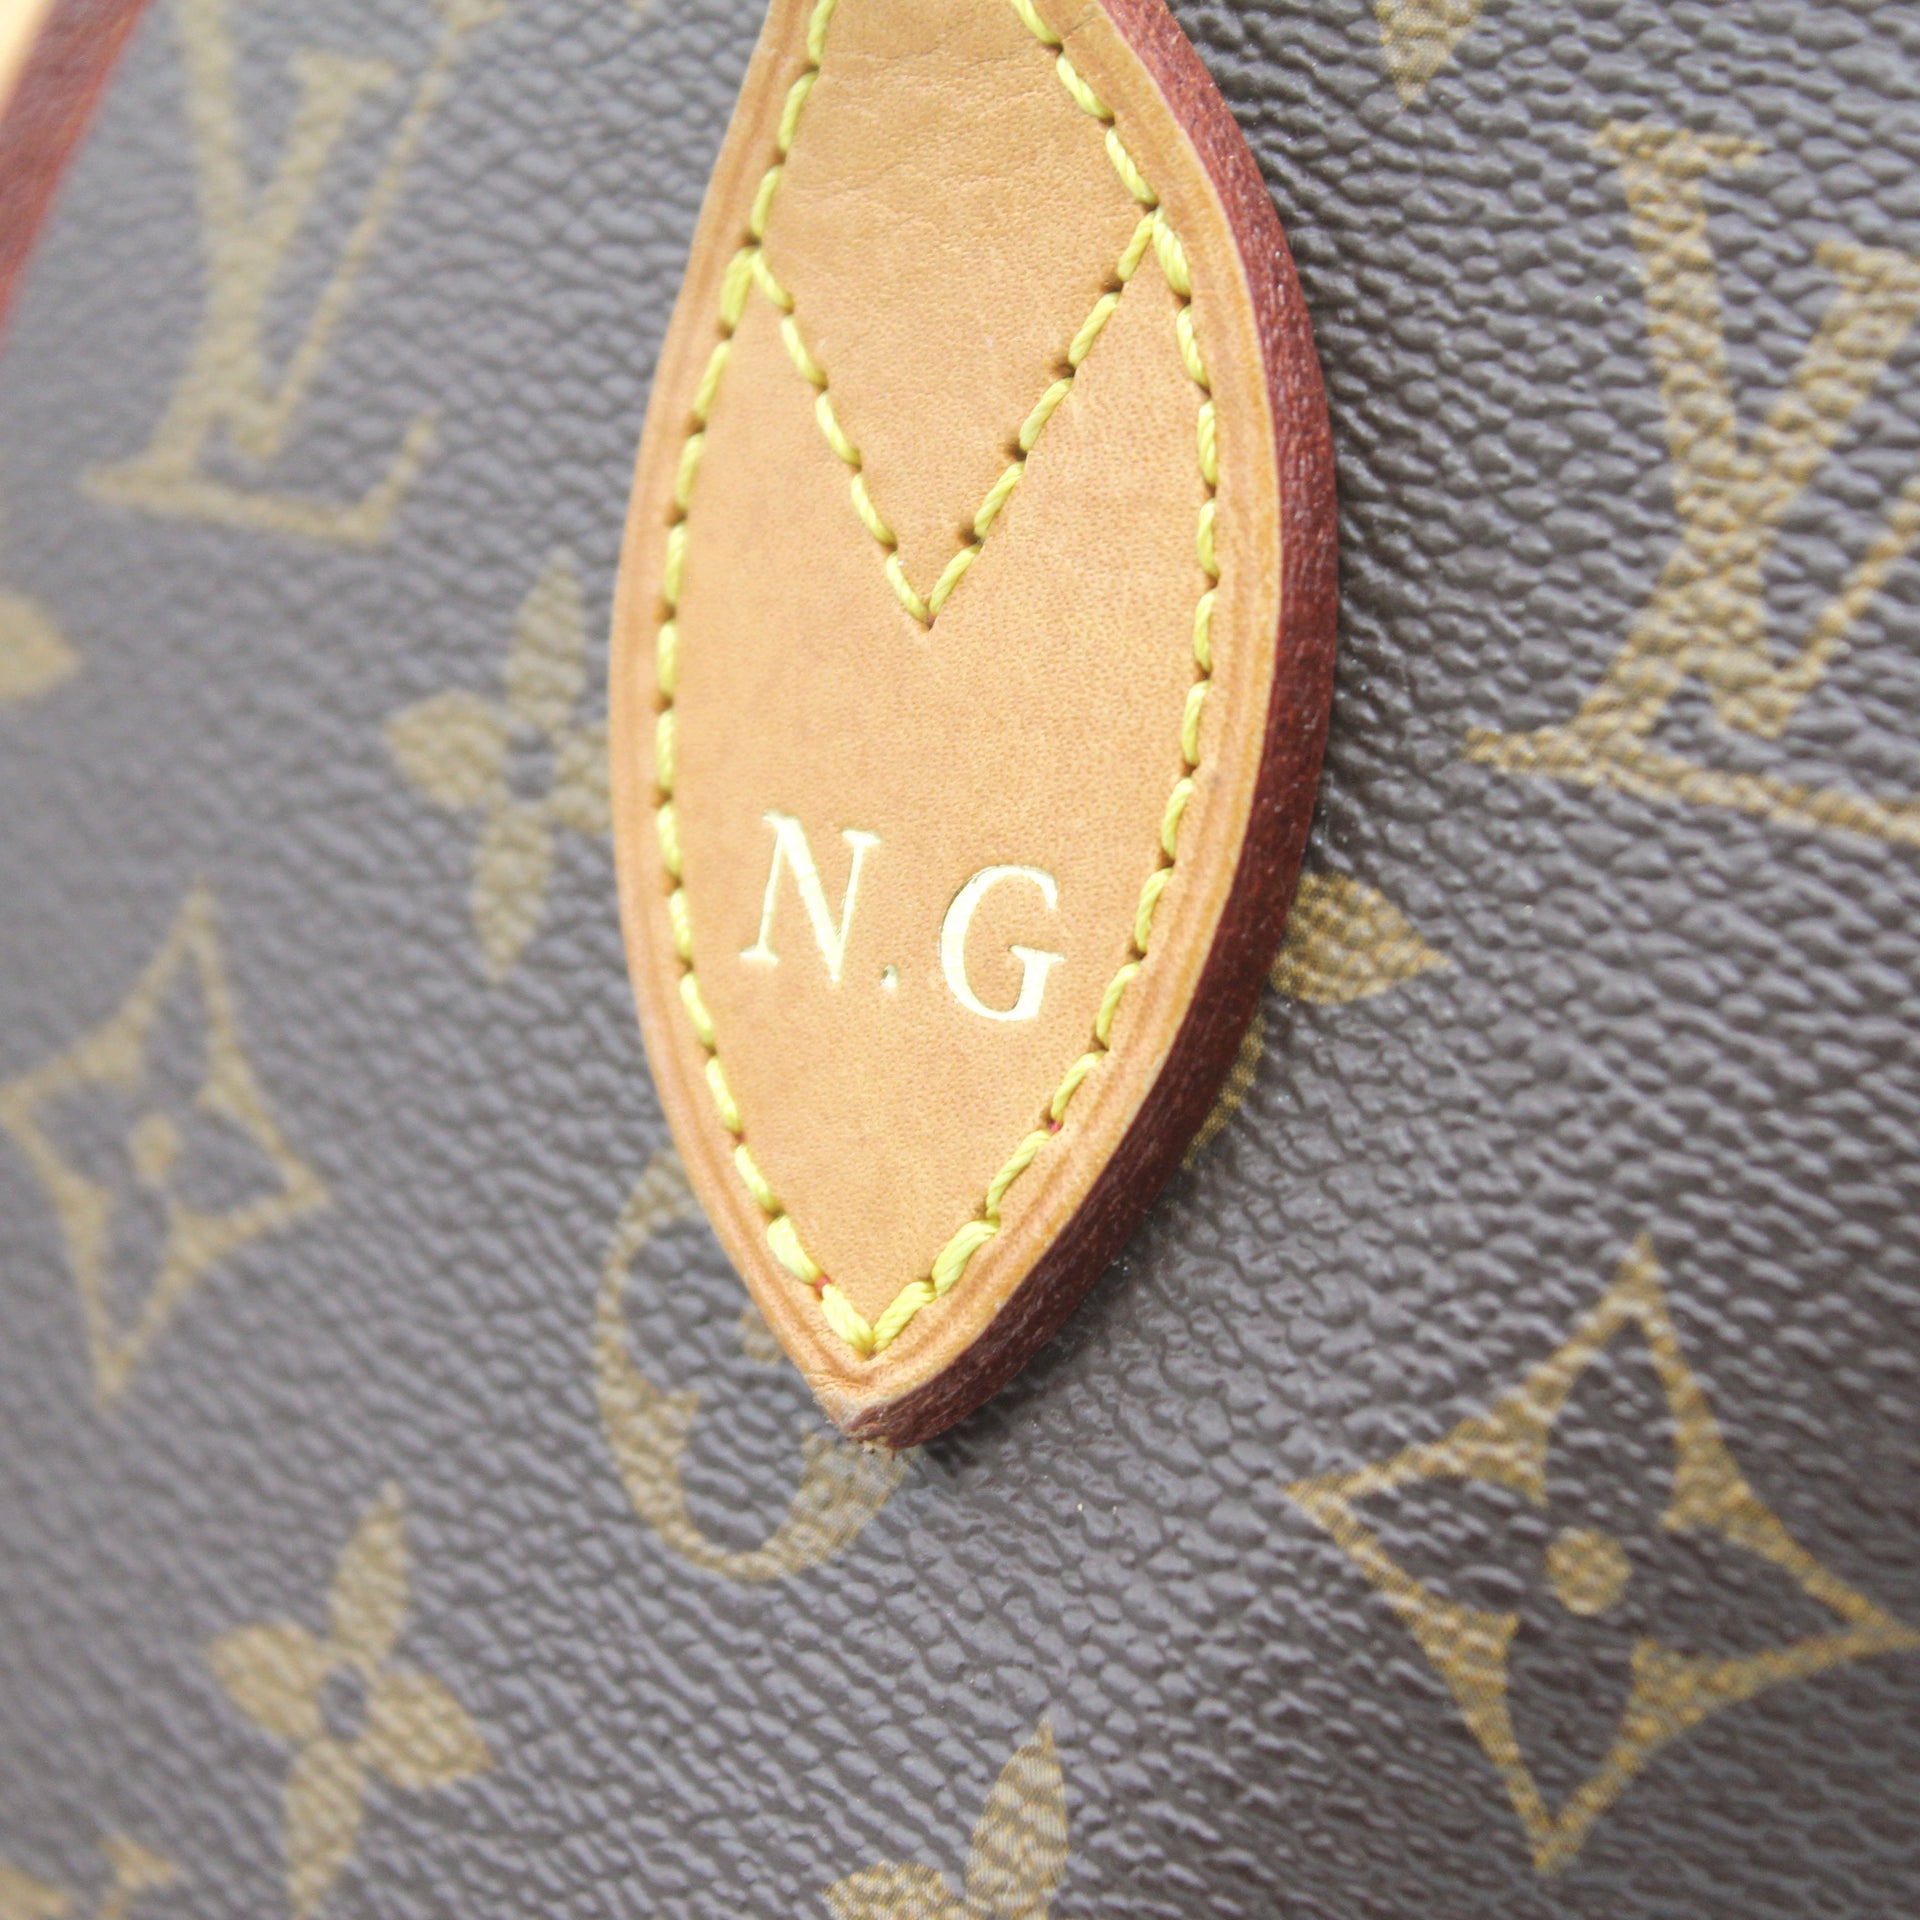 Authenticated Used LOUIS VUITTON Louis Vuitton Monogram Neverfull